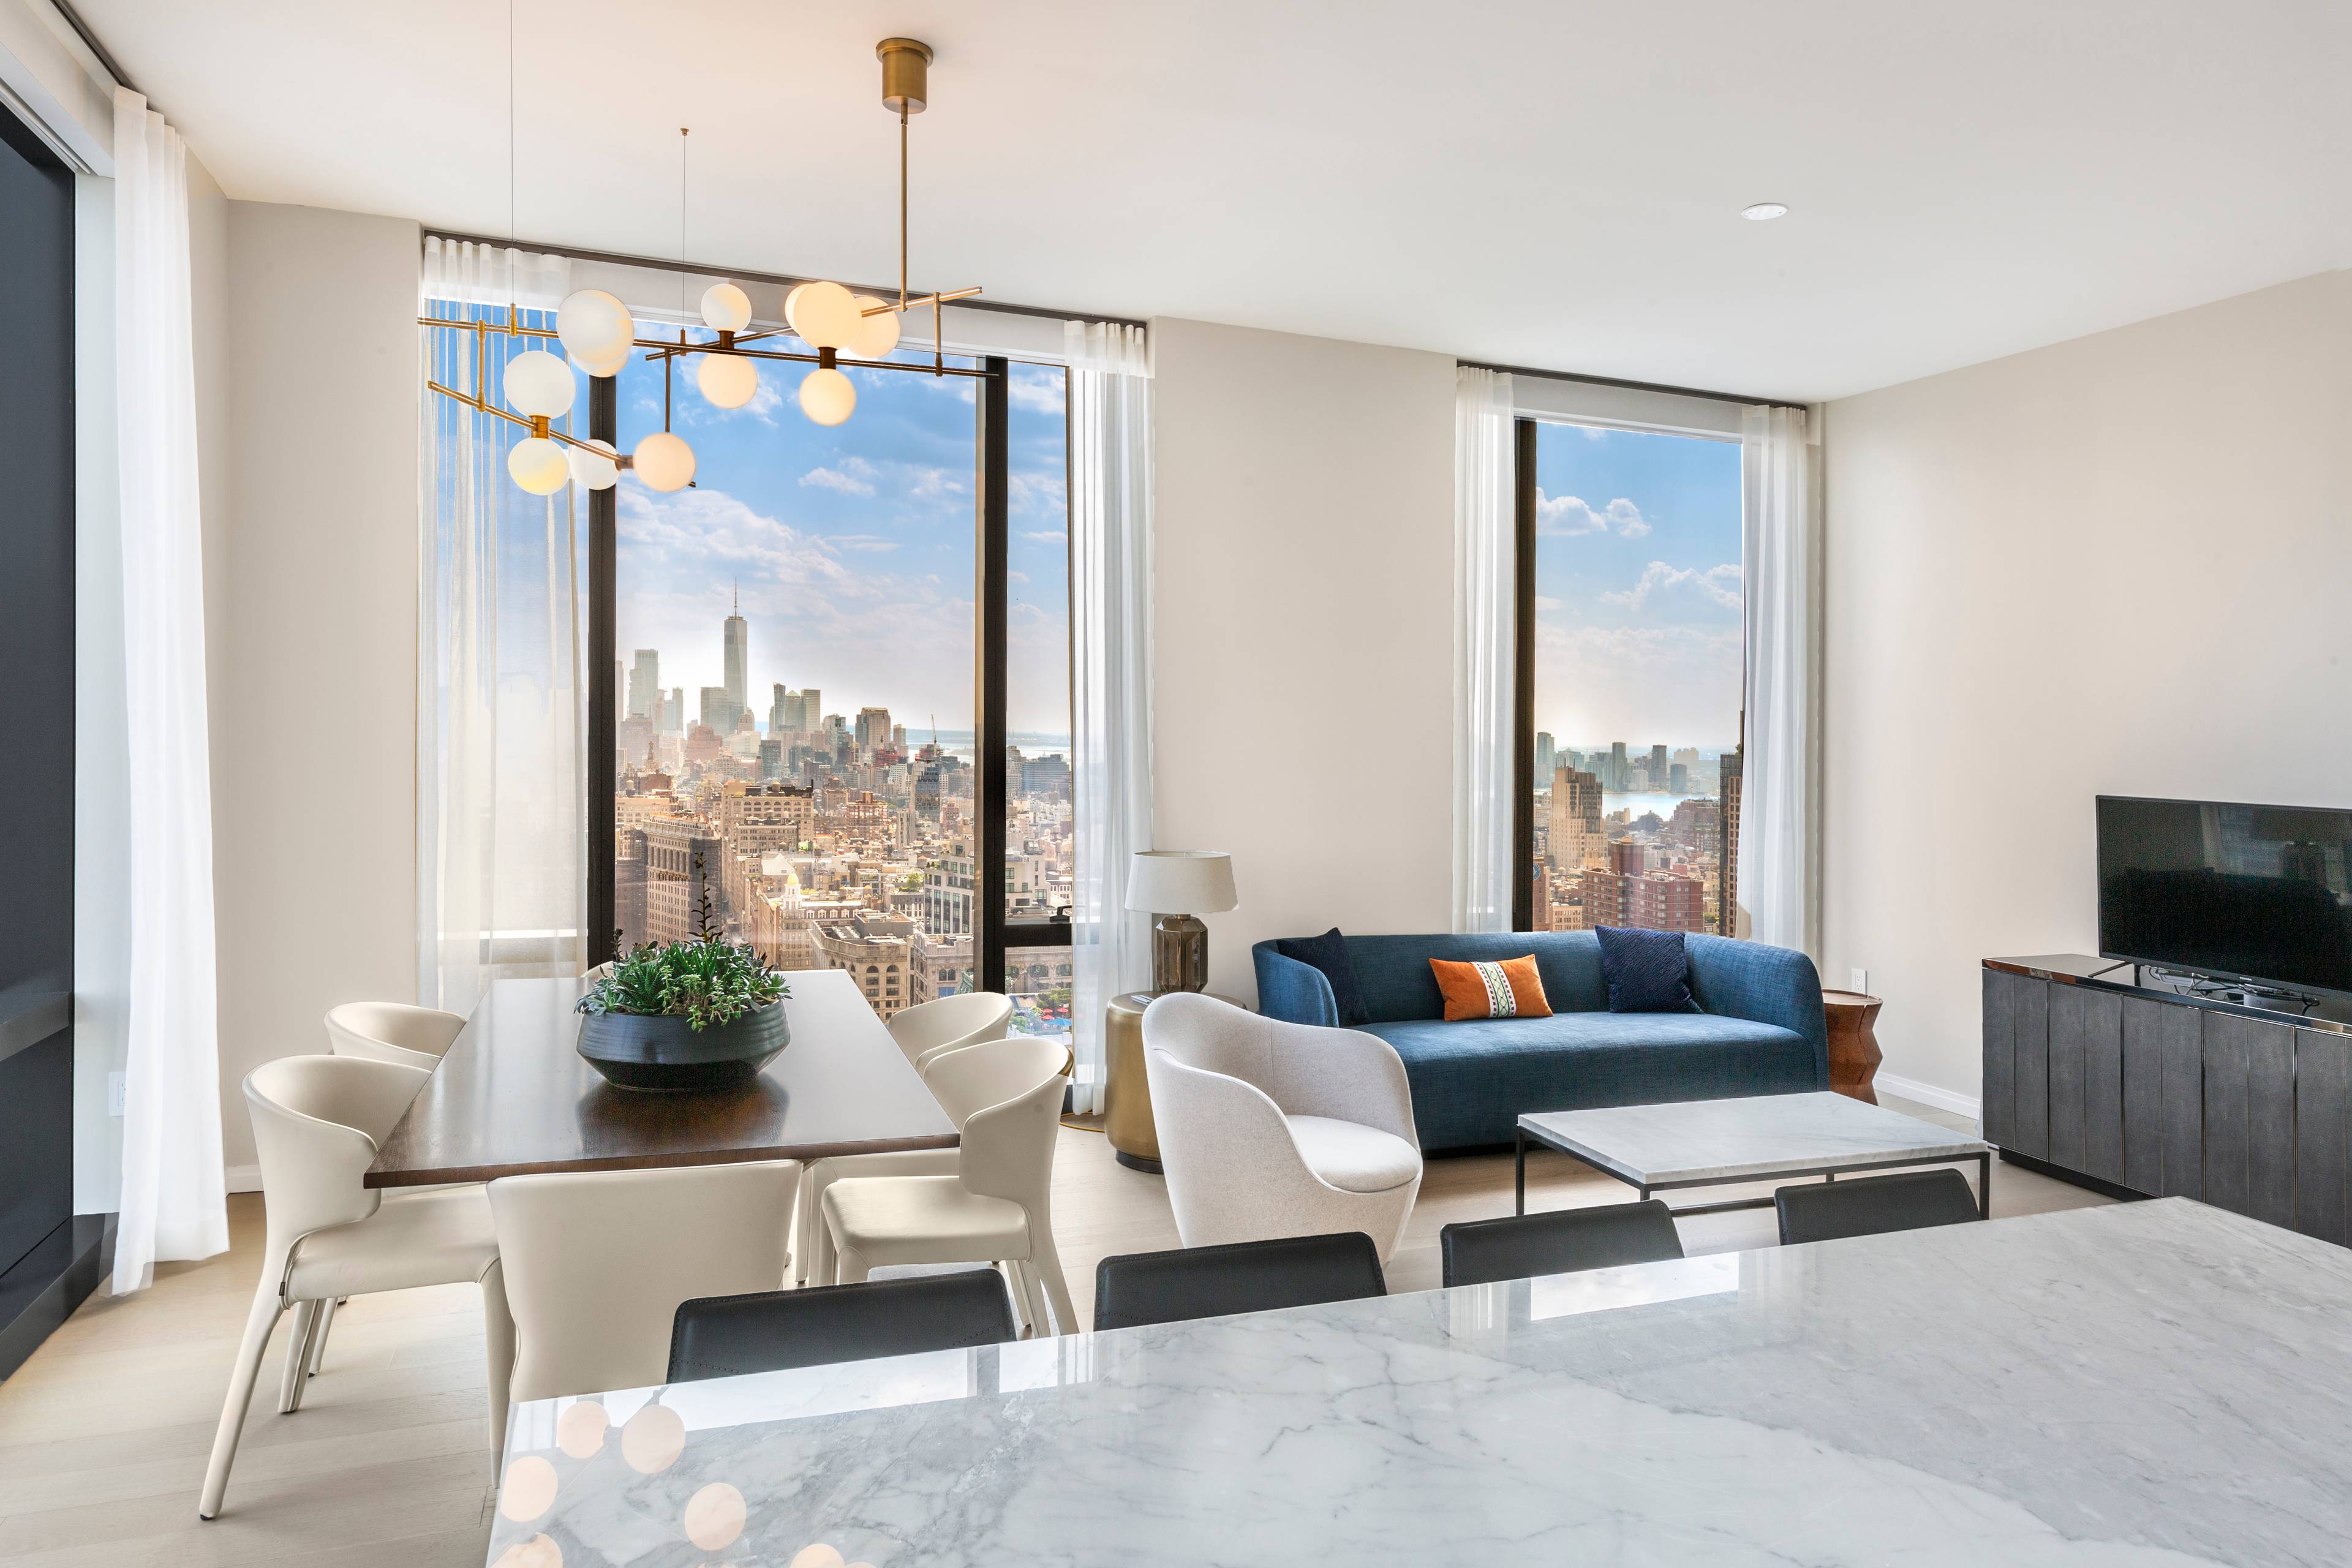 Come home to these mesmerizing views stretching from World Trade Center to Central Park.